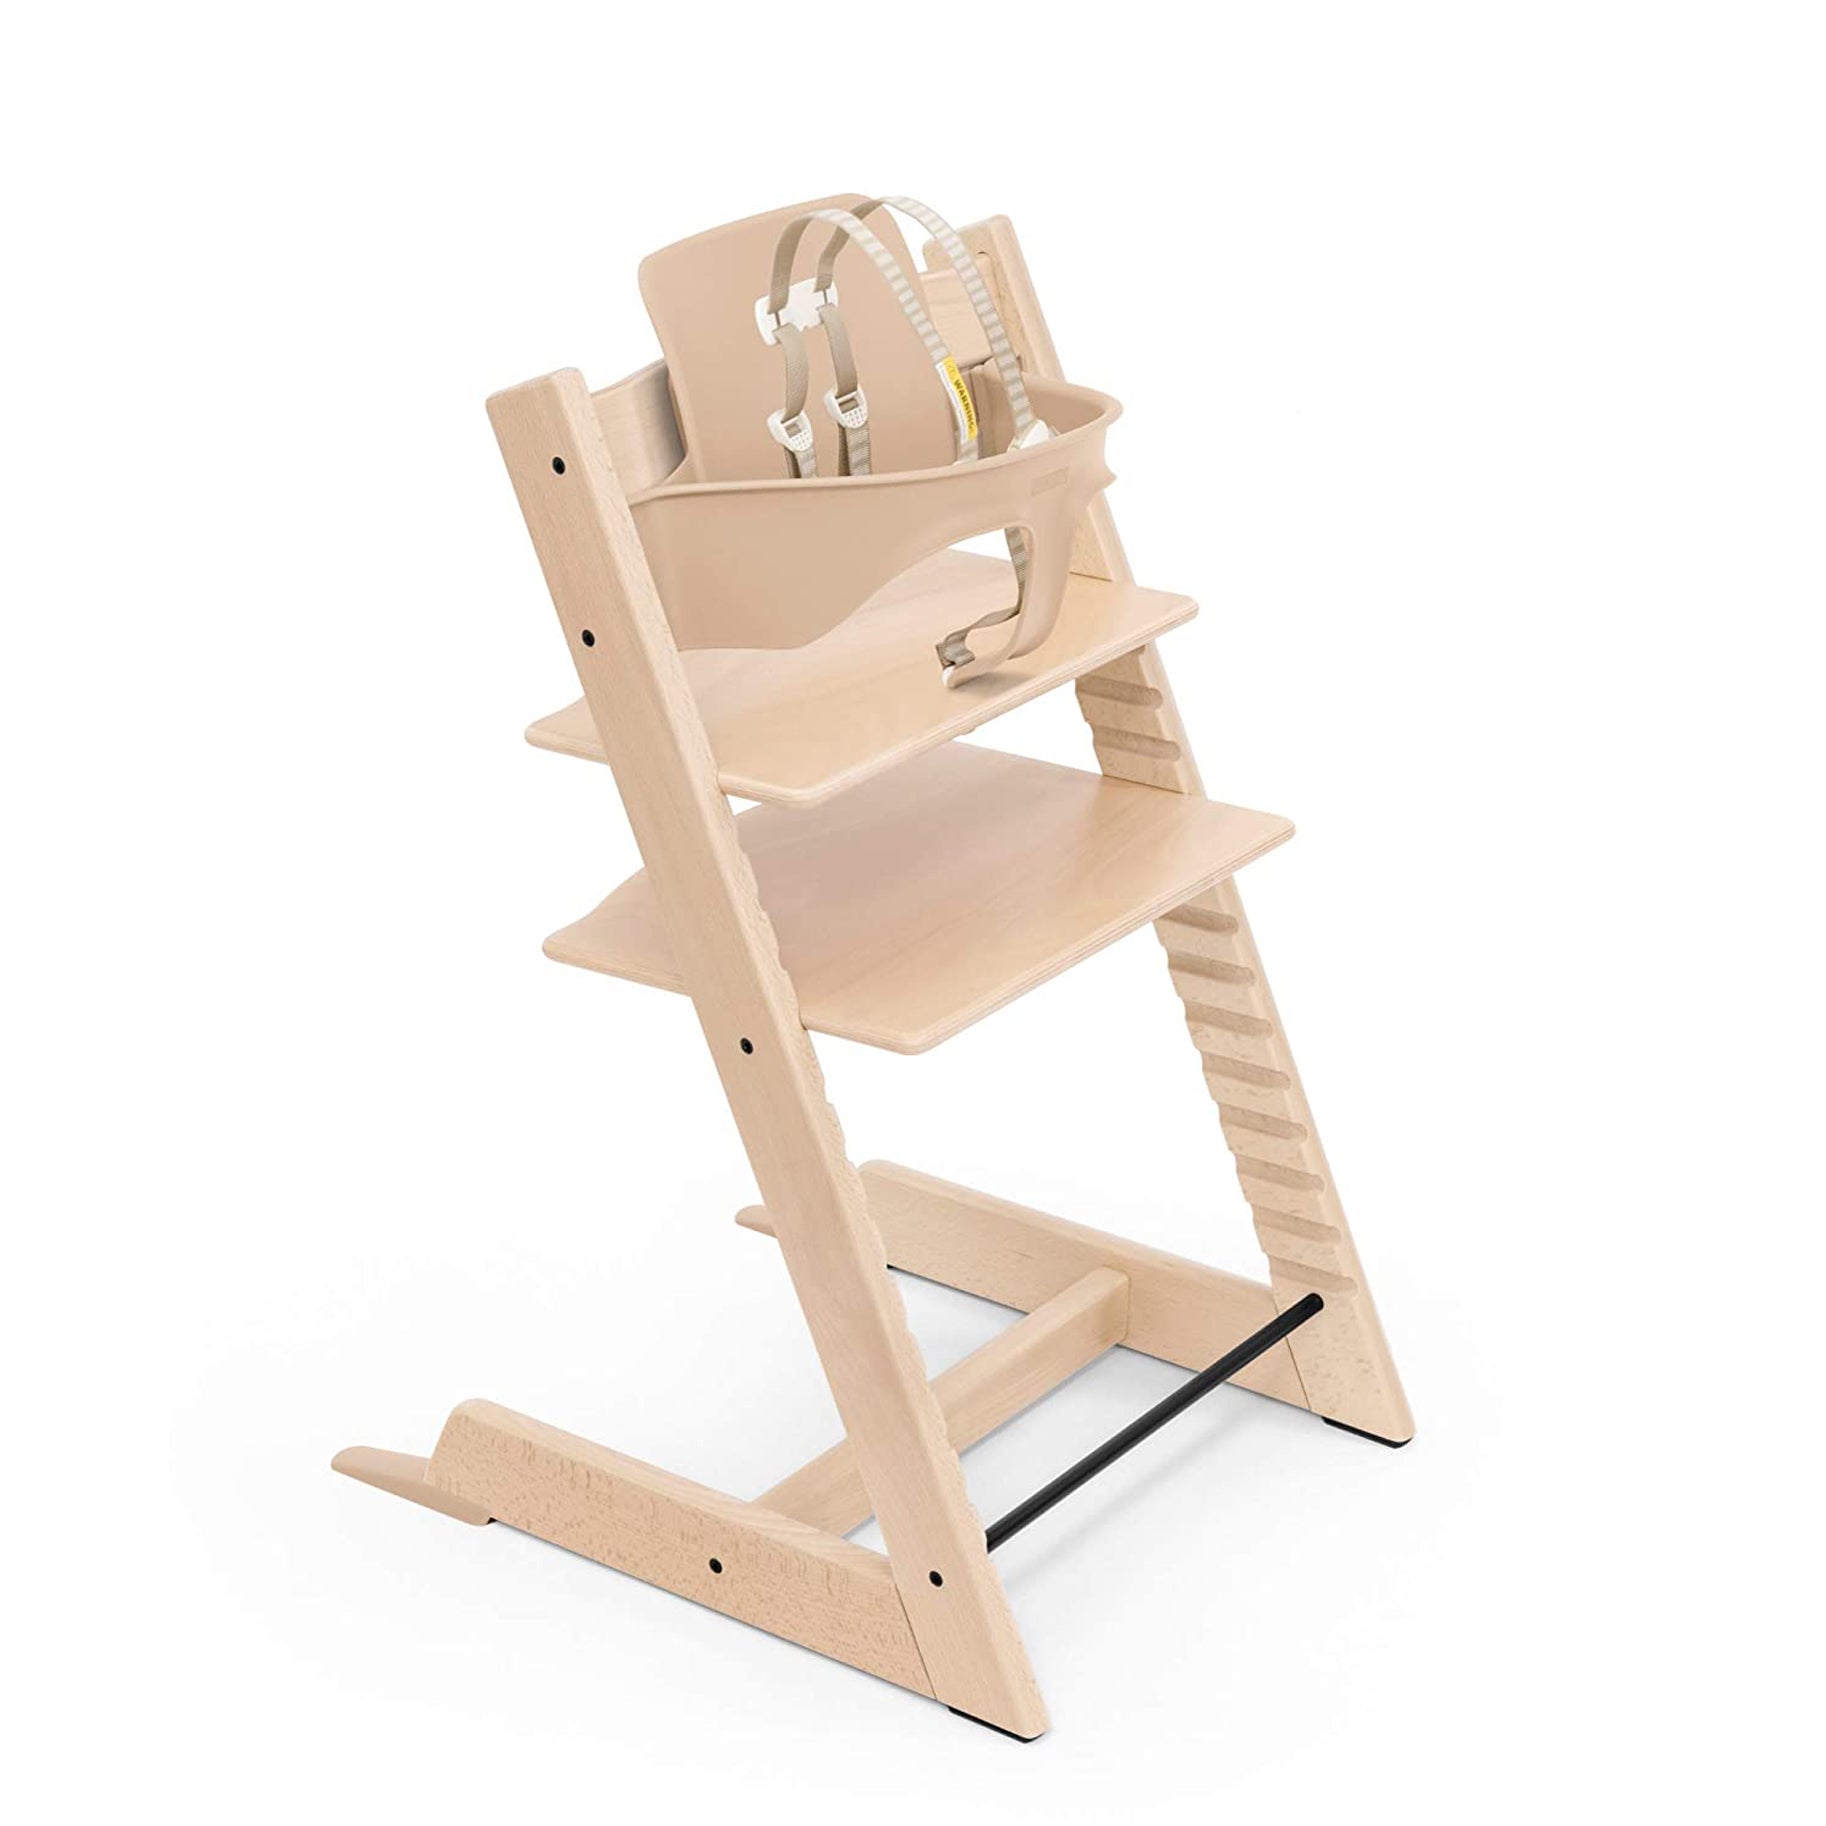 Stokke Tripp Trapp High Chair Domino